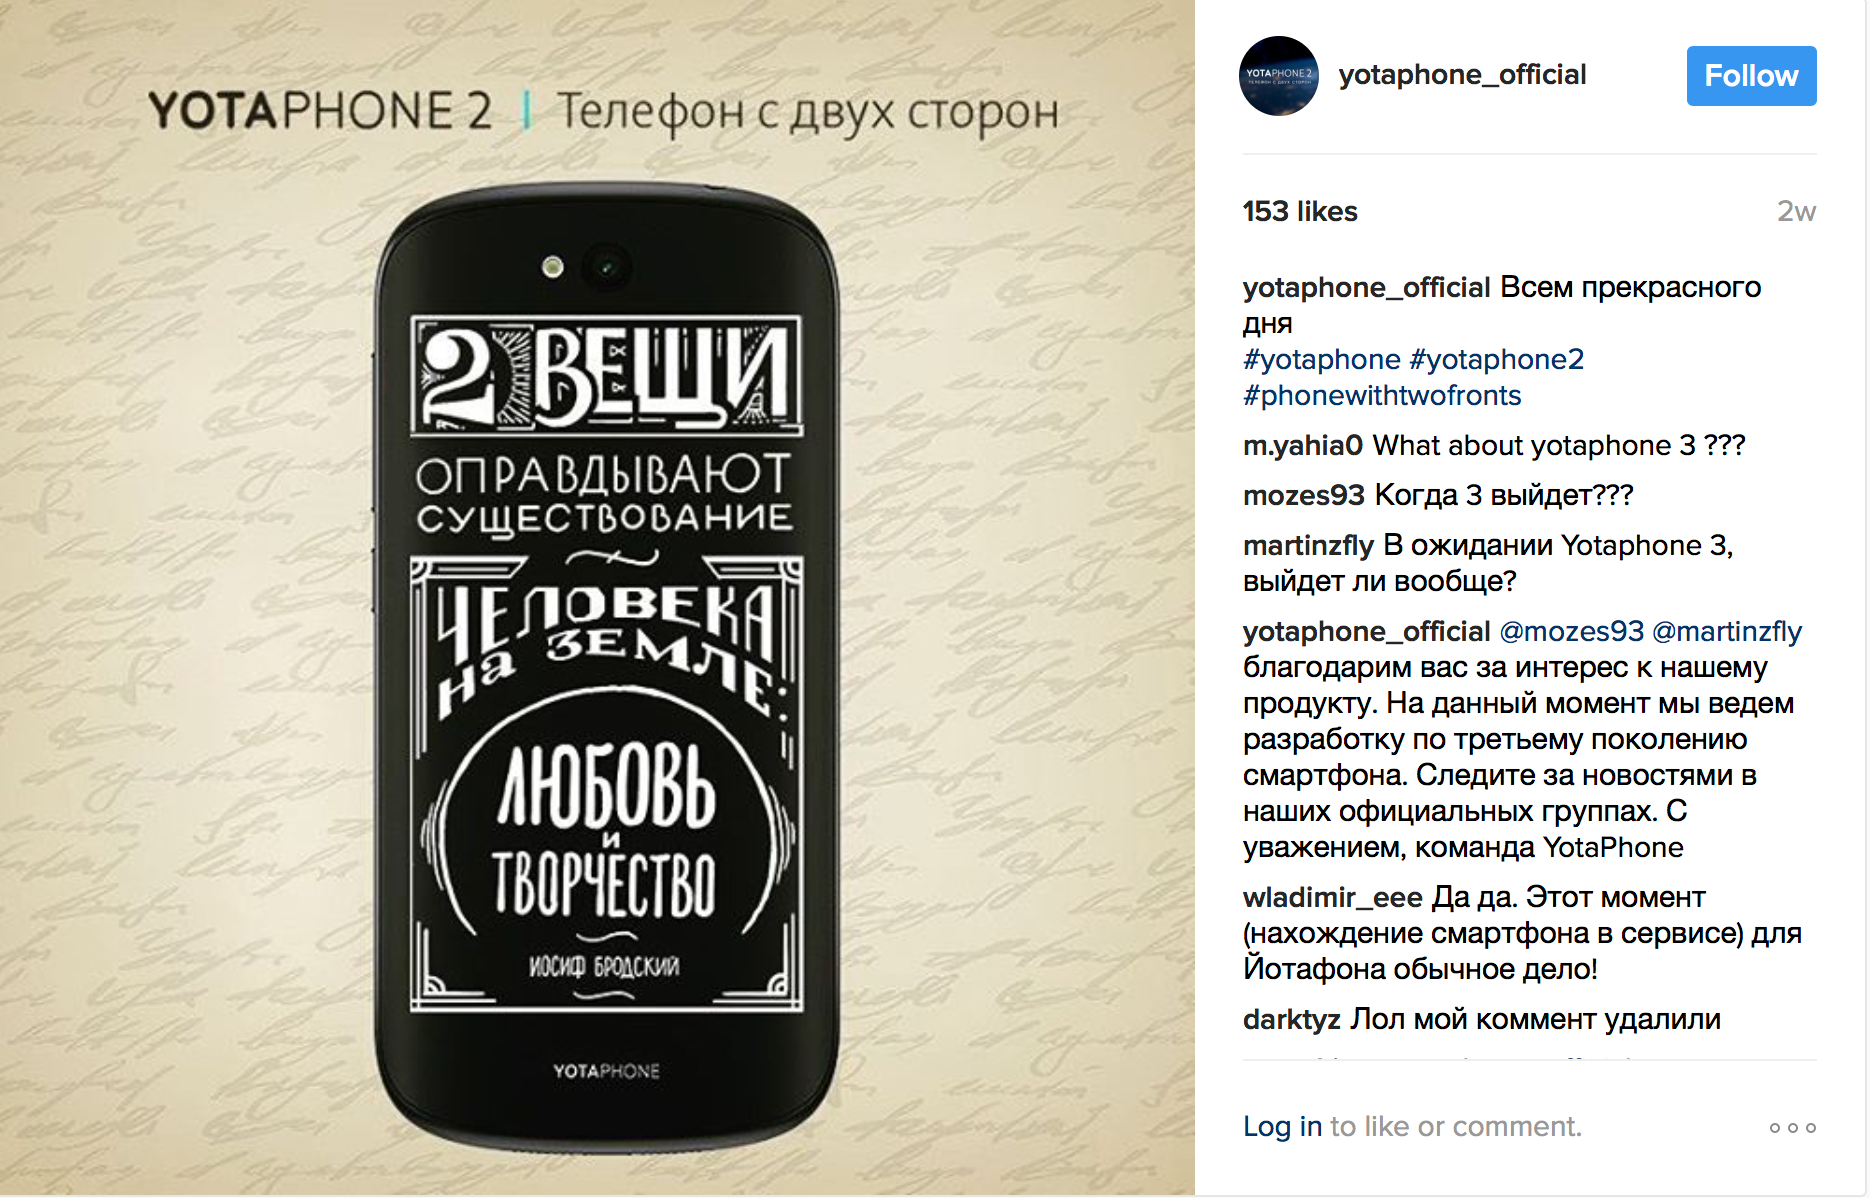 The YotaPhone 3 is still alive and well